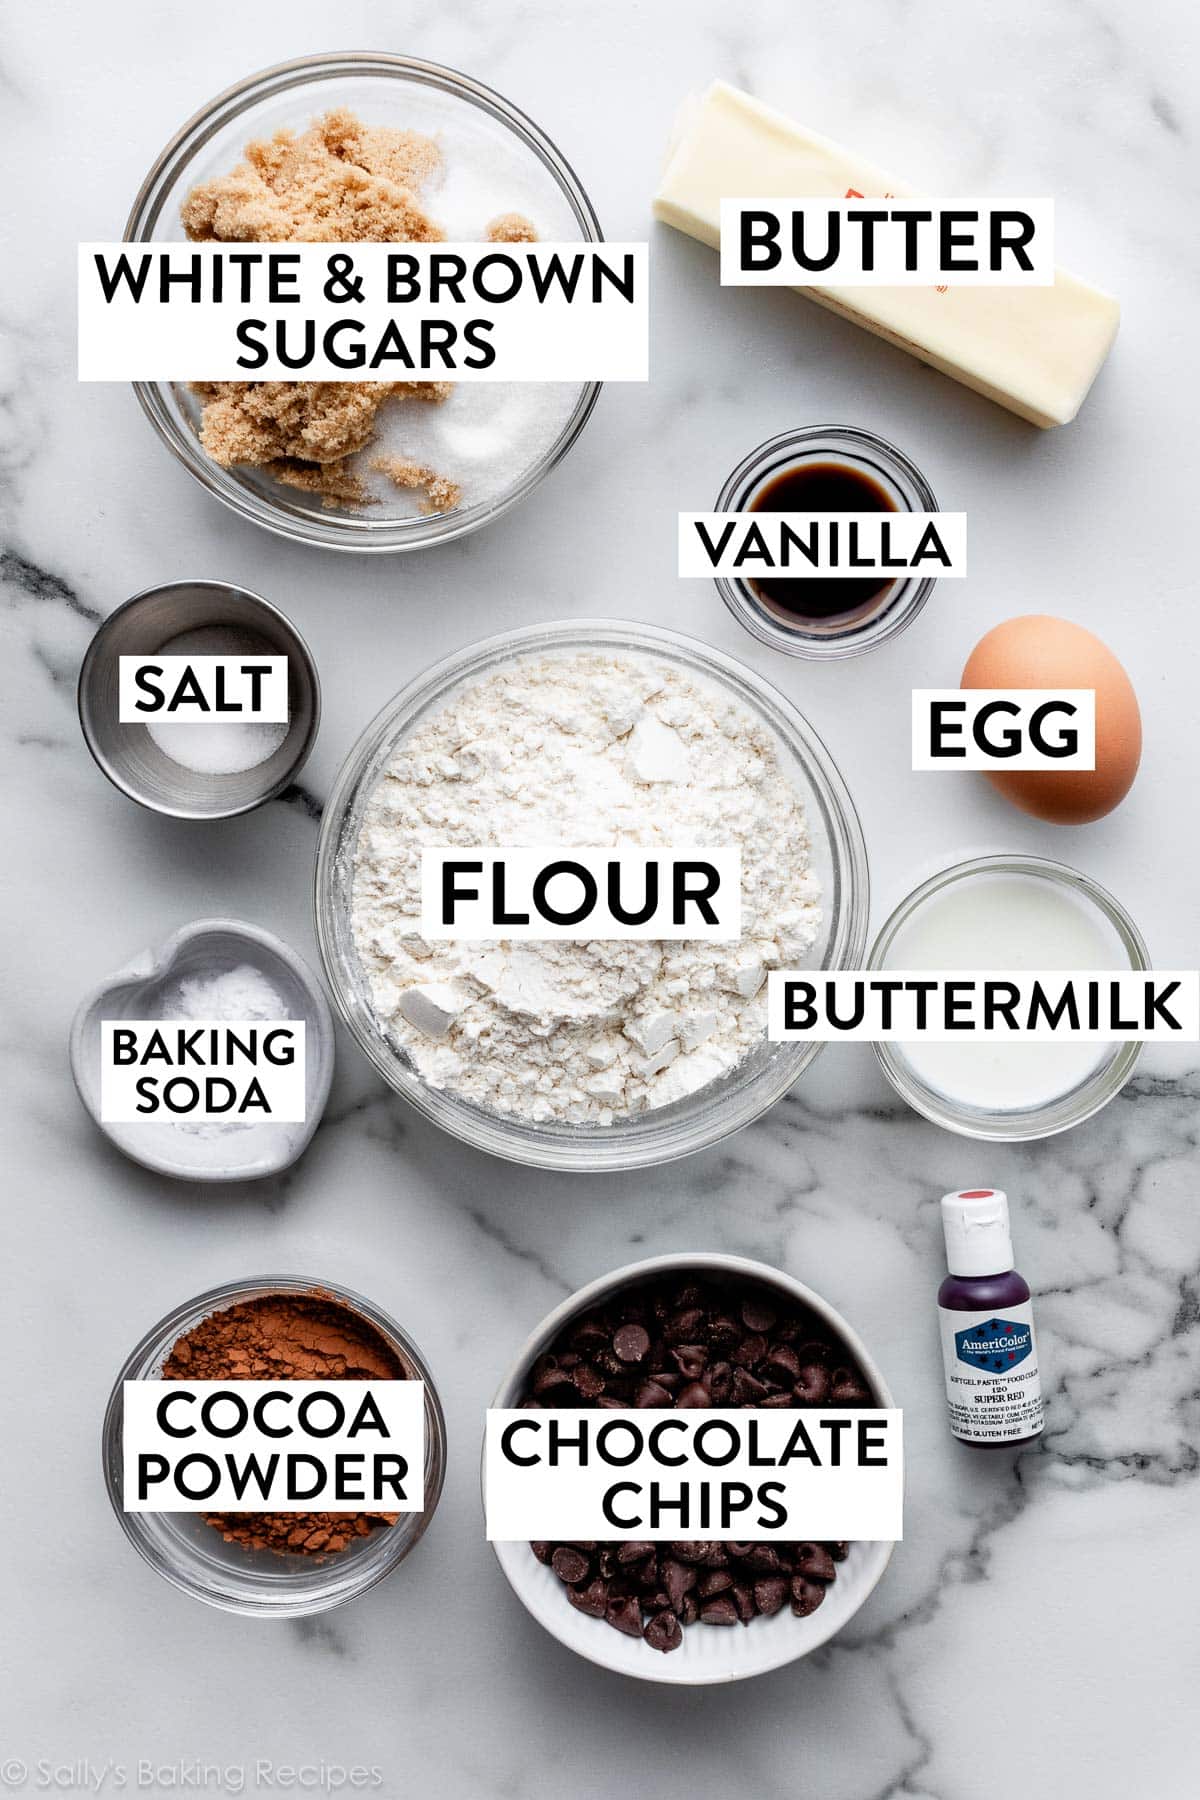 ingredients on counter including cocoa powder, brown and white sugars, butter, vanilla, salt, egg, and buttermilk.